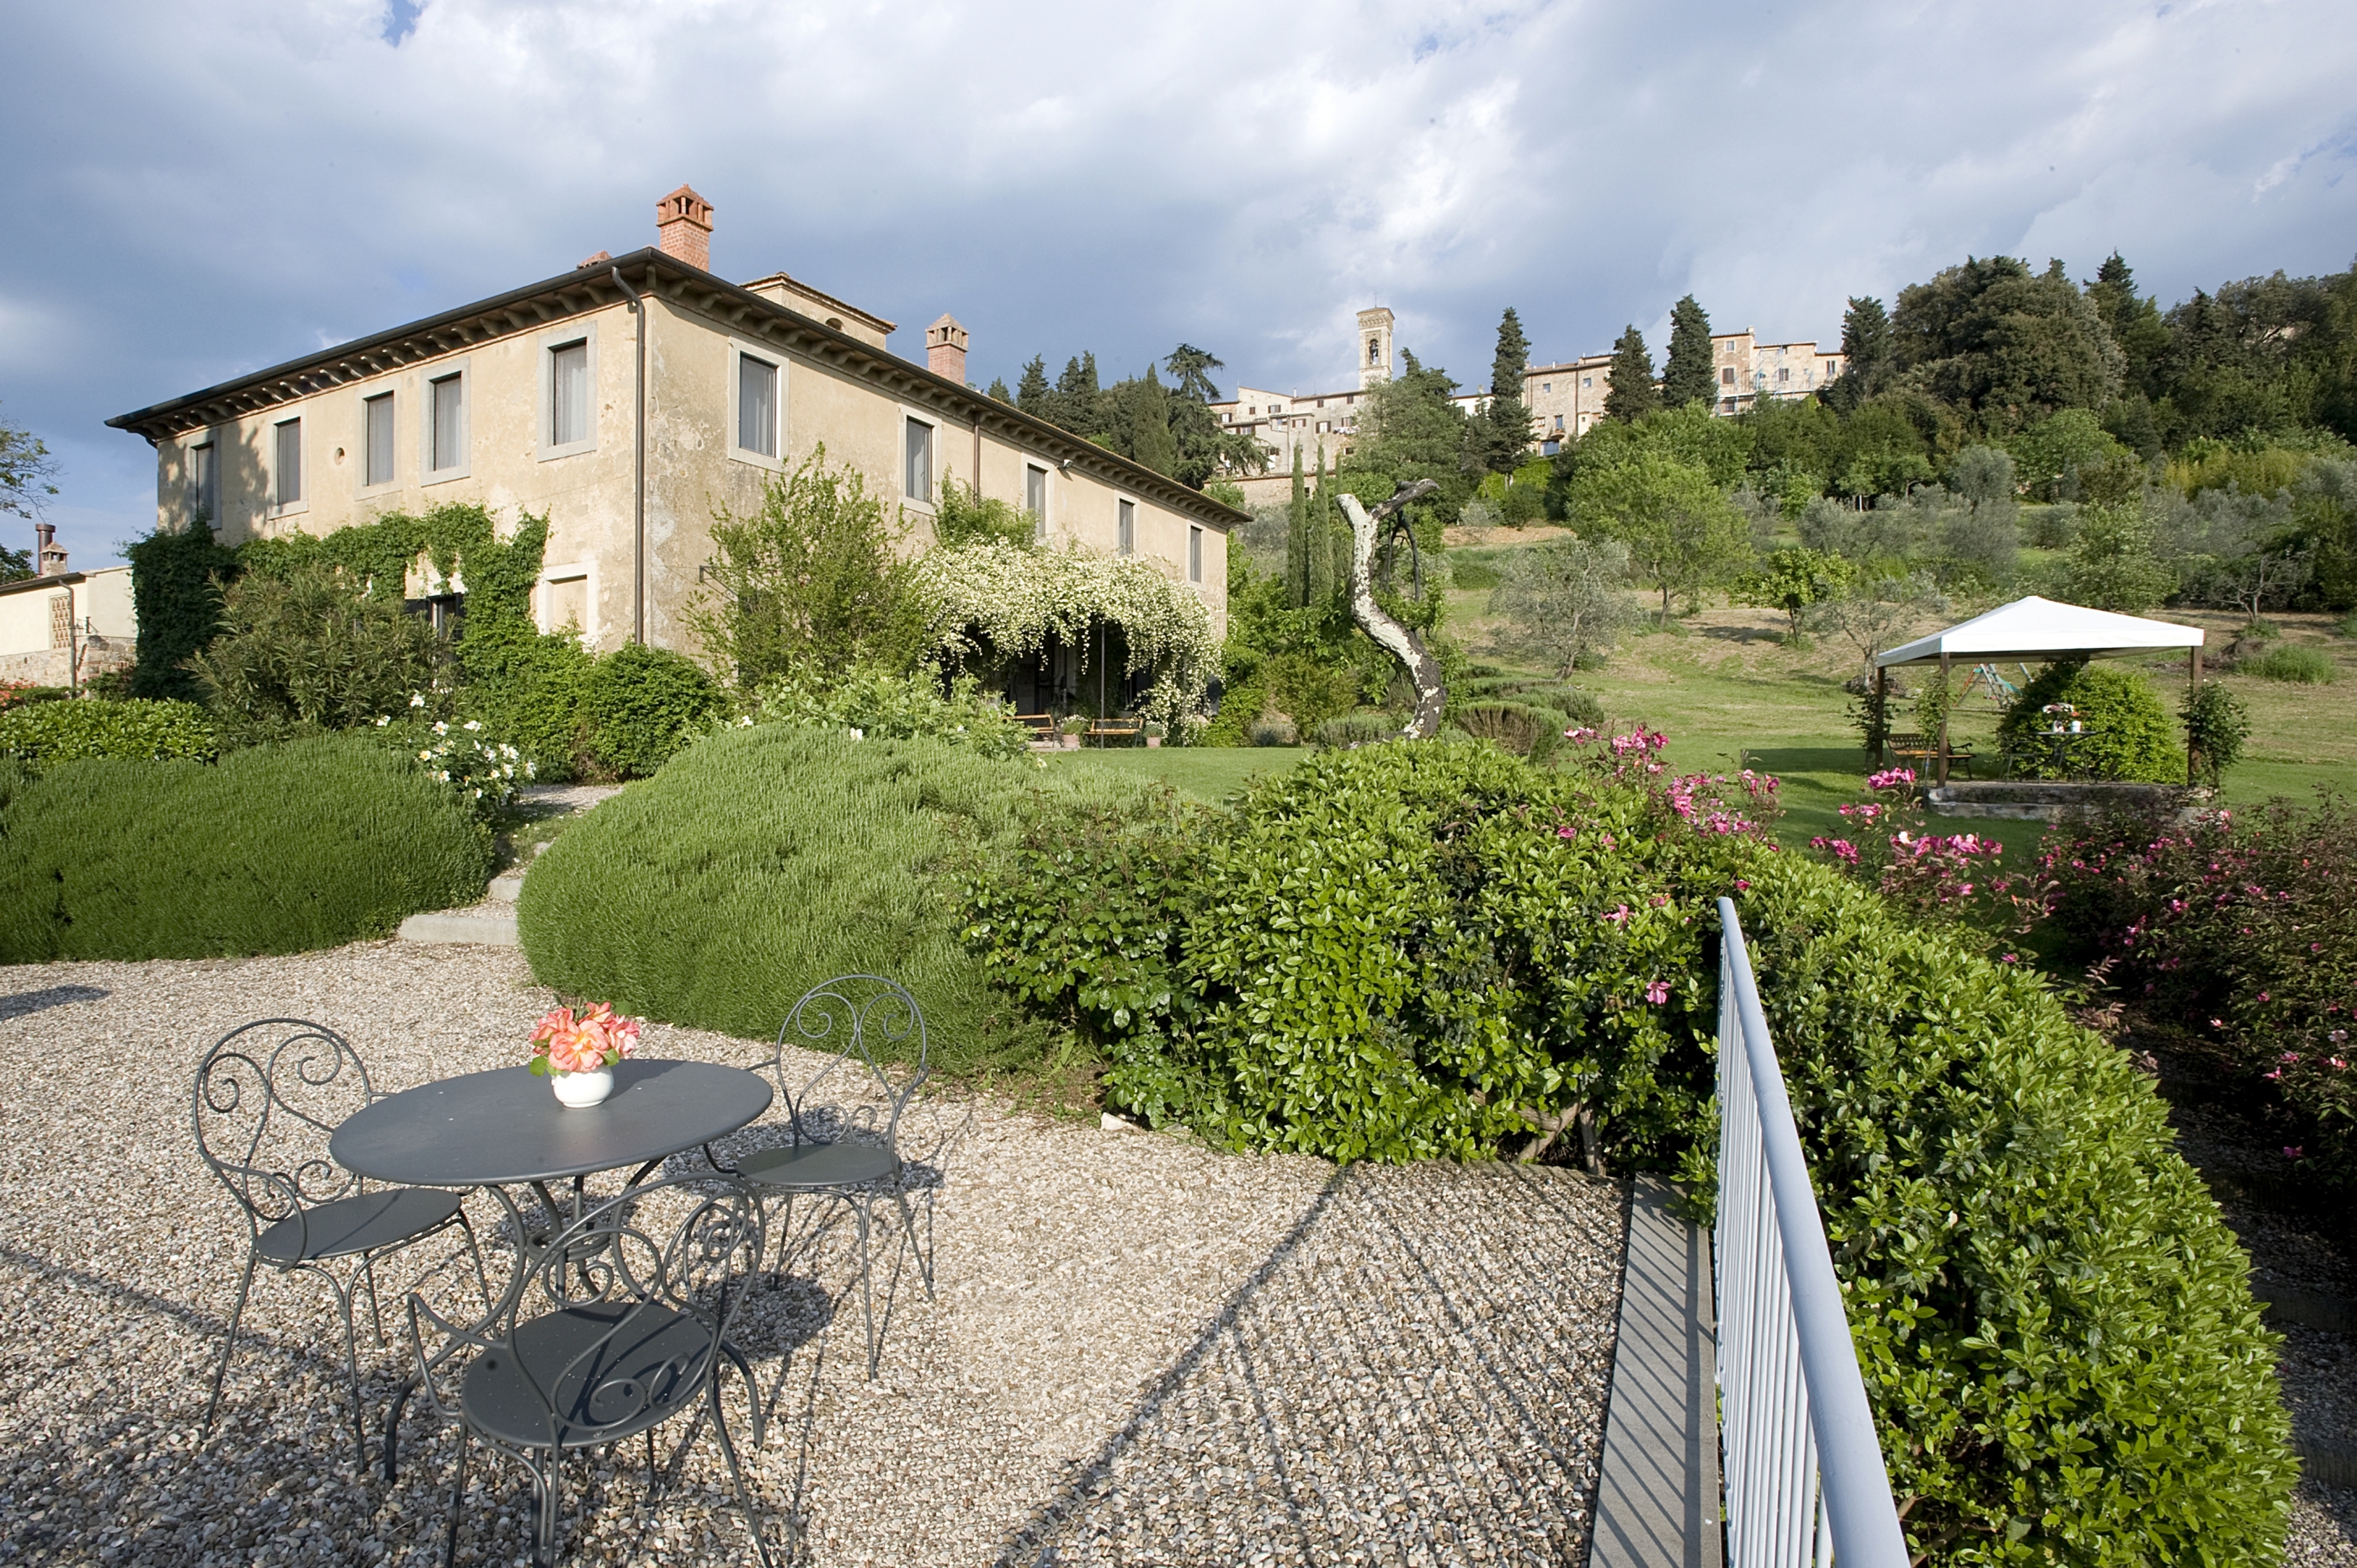 Terrace and exterior of Podere Barberino, Tuscany